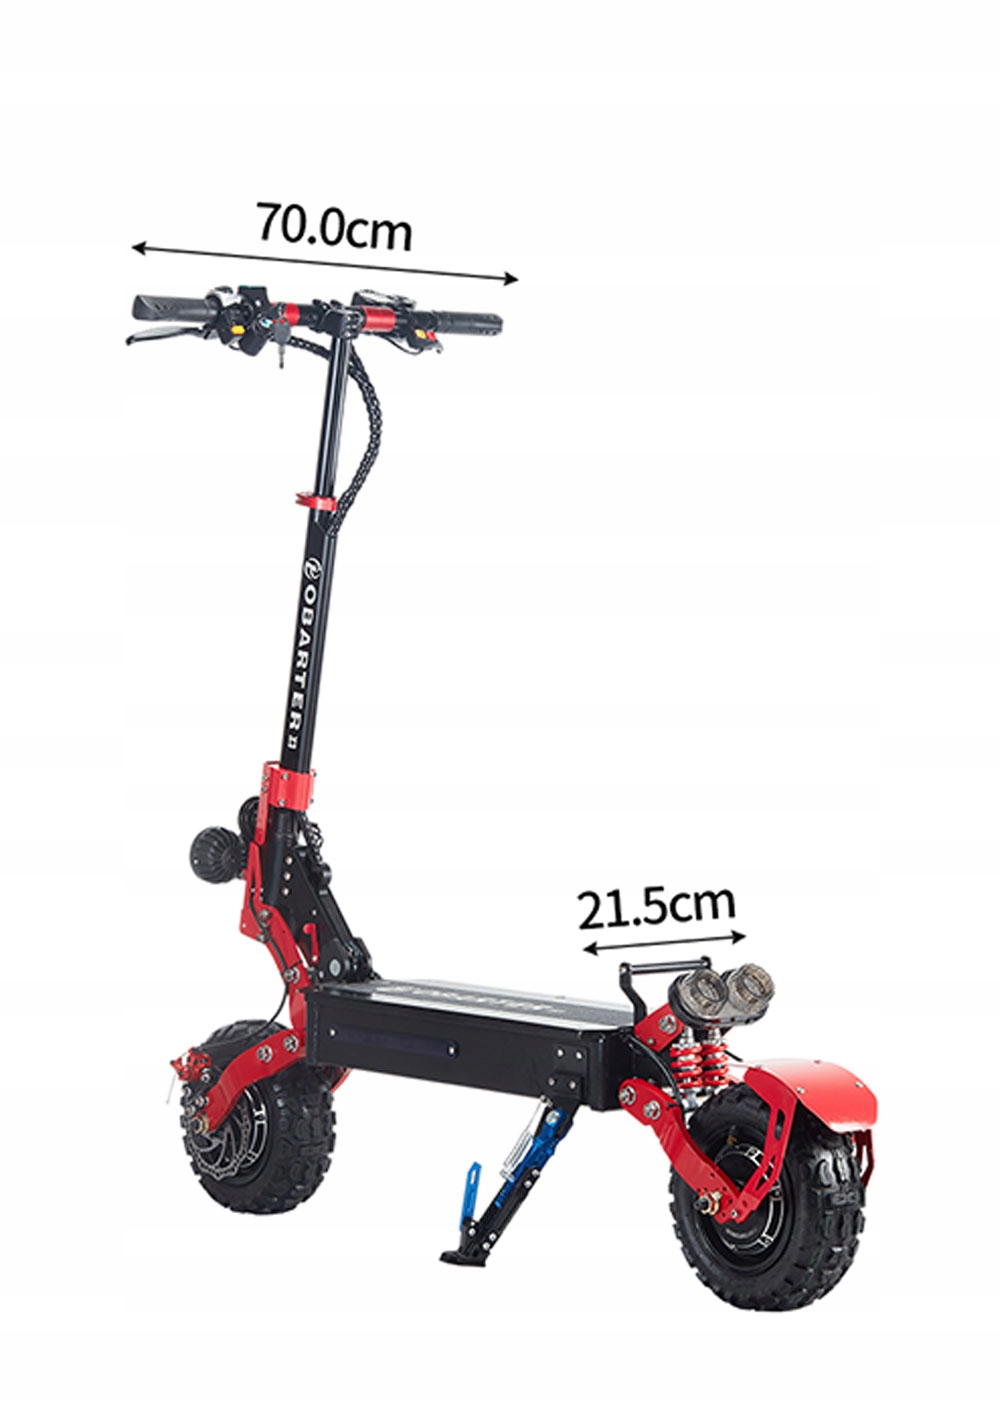 OBARTER X3 11 inch 2400W 48V Electric Scooter Model X3-5